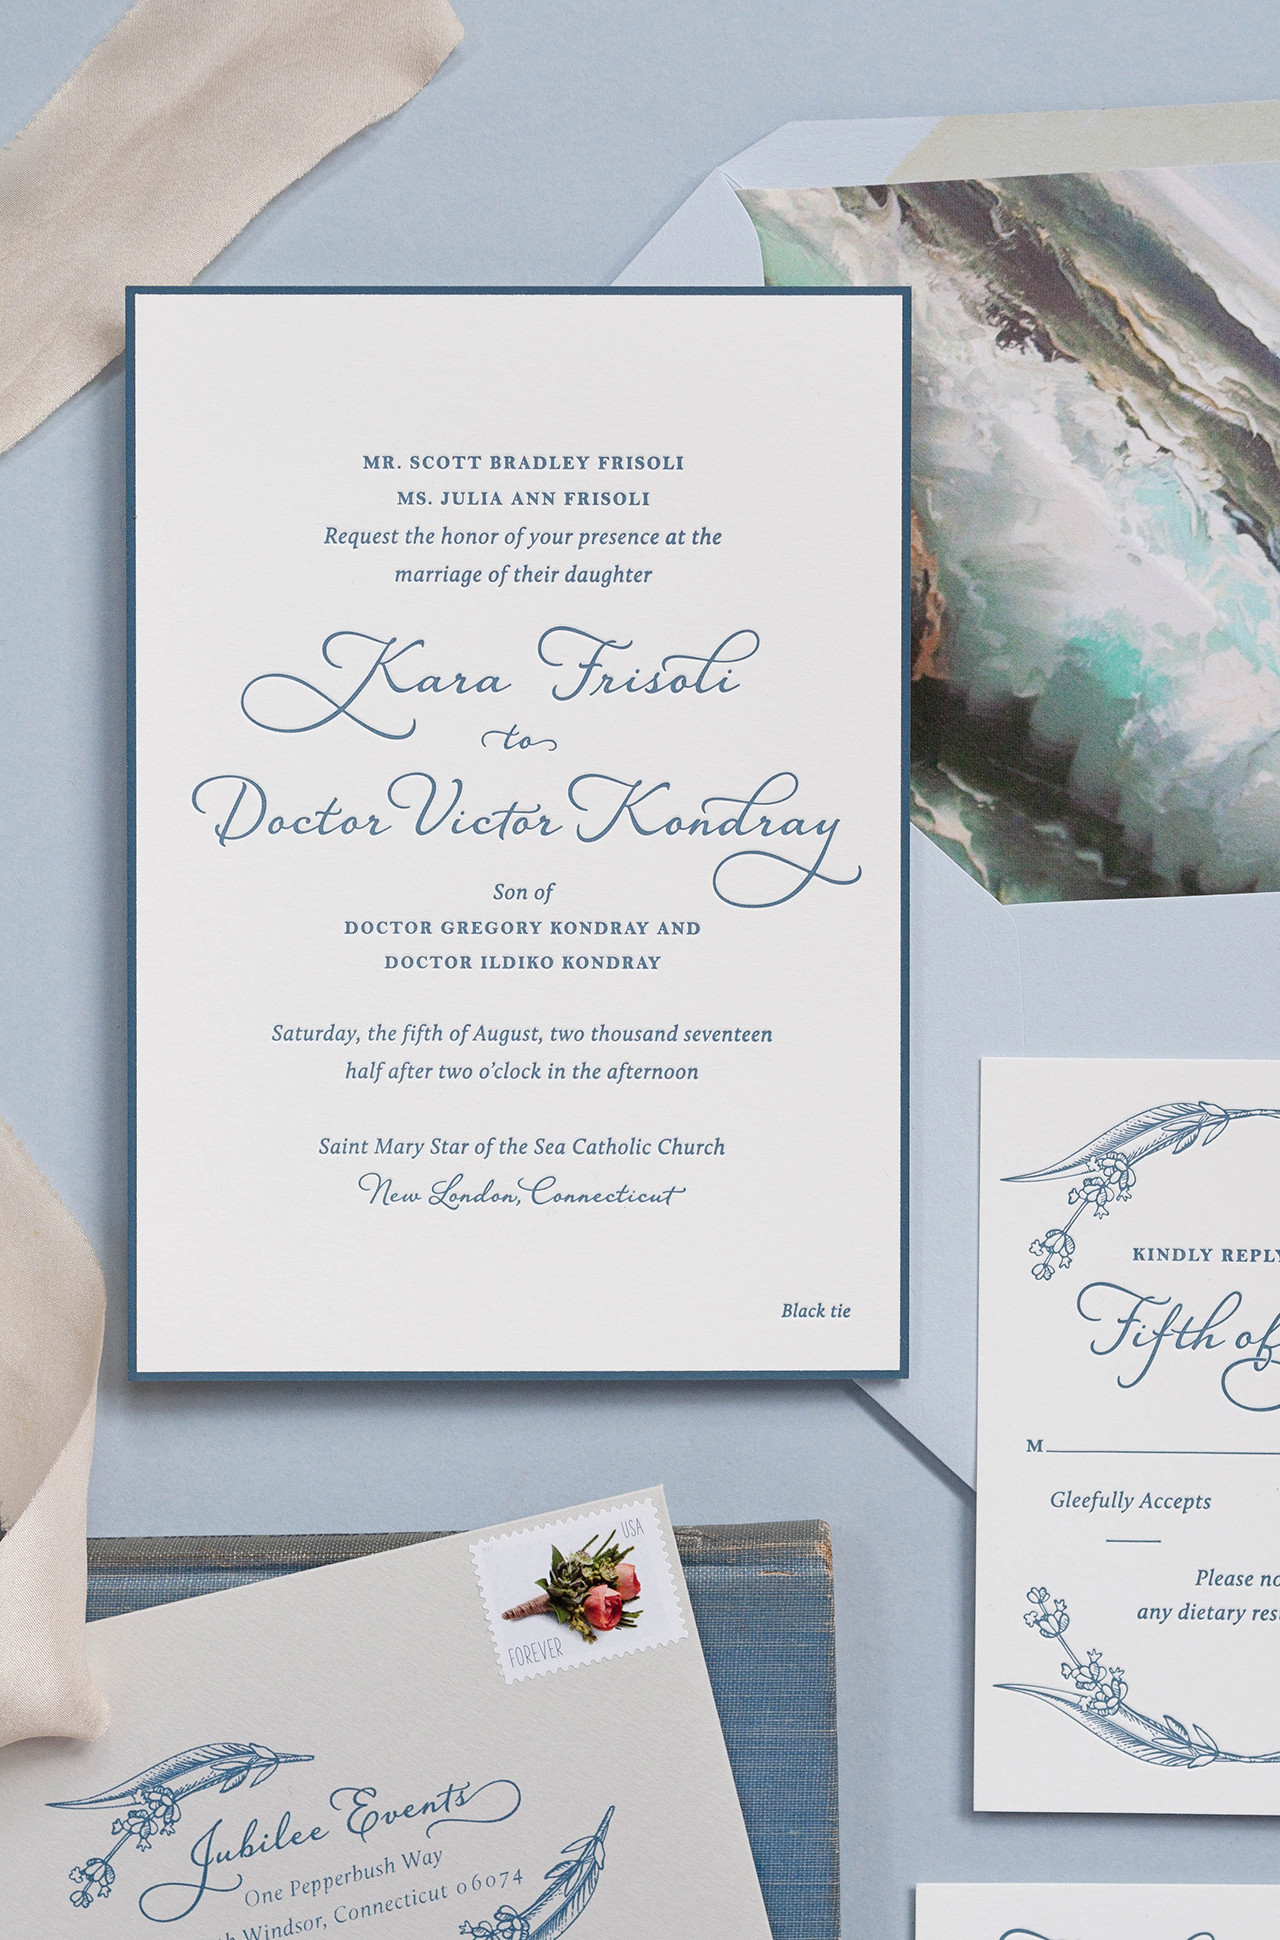 Classic Ocean-Inspired Wedding Invitations by Coral Pheasant